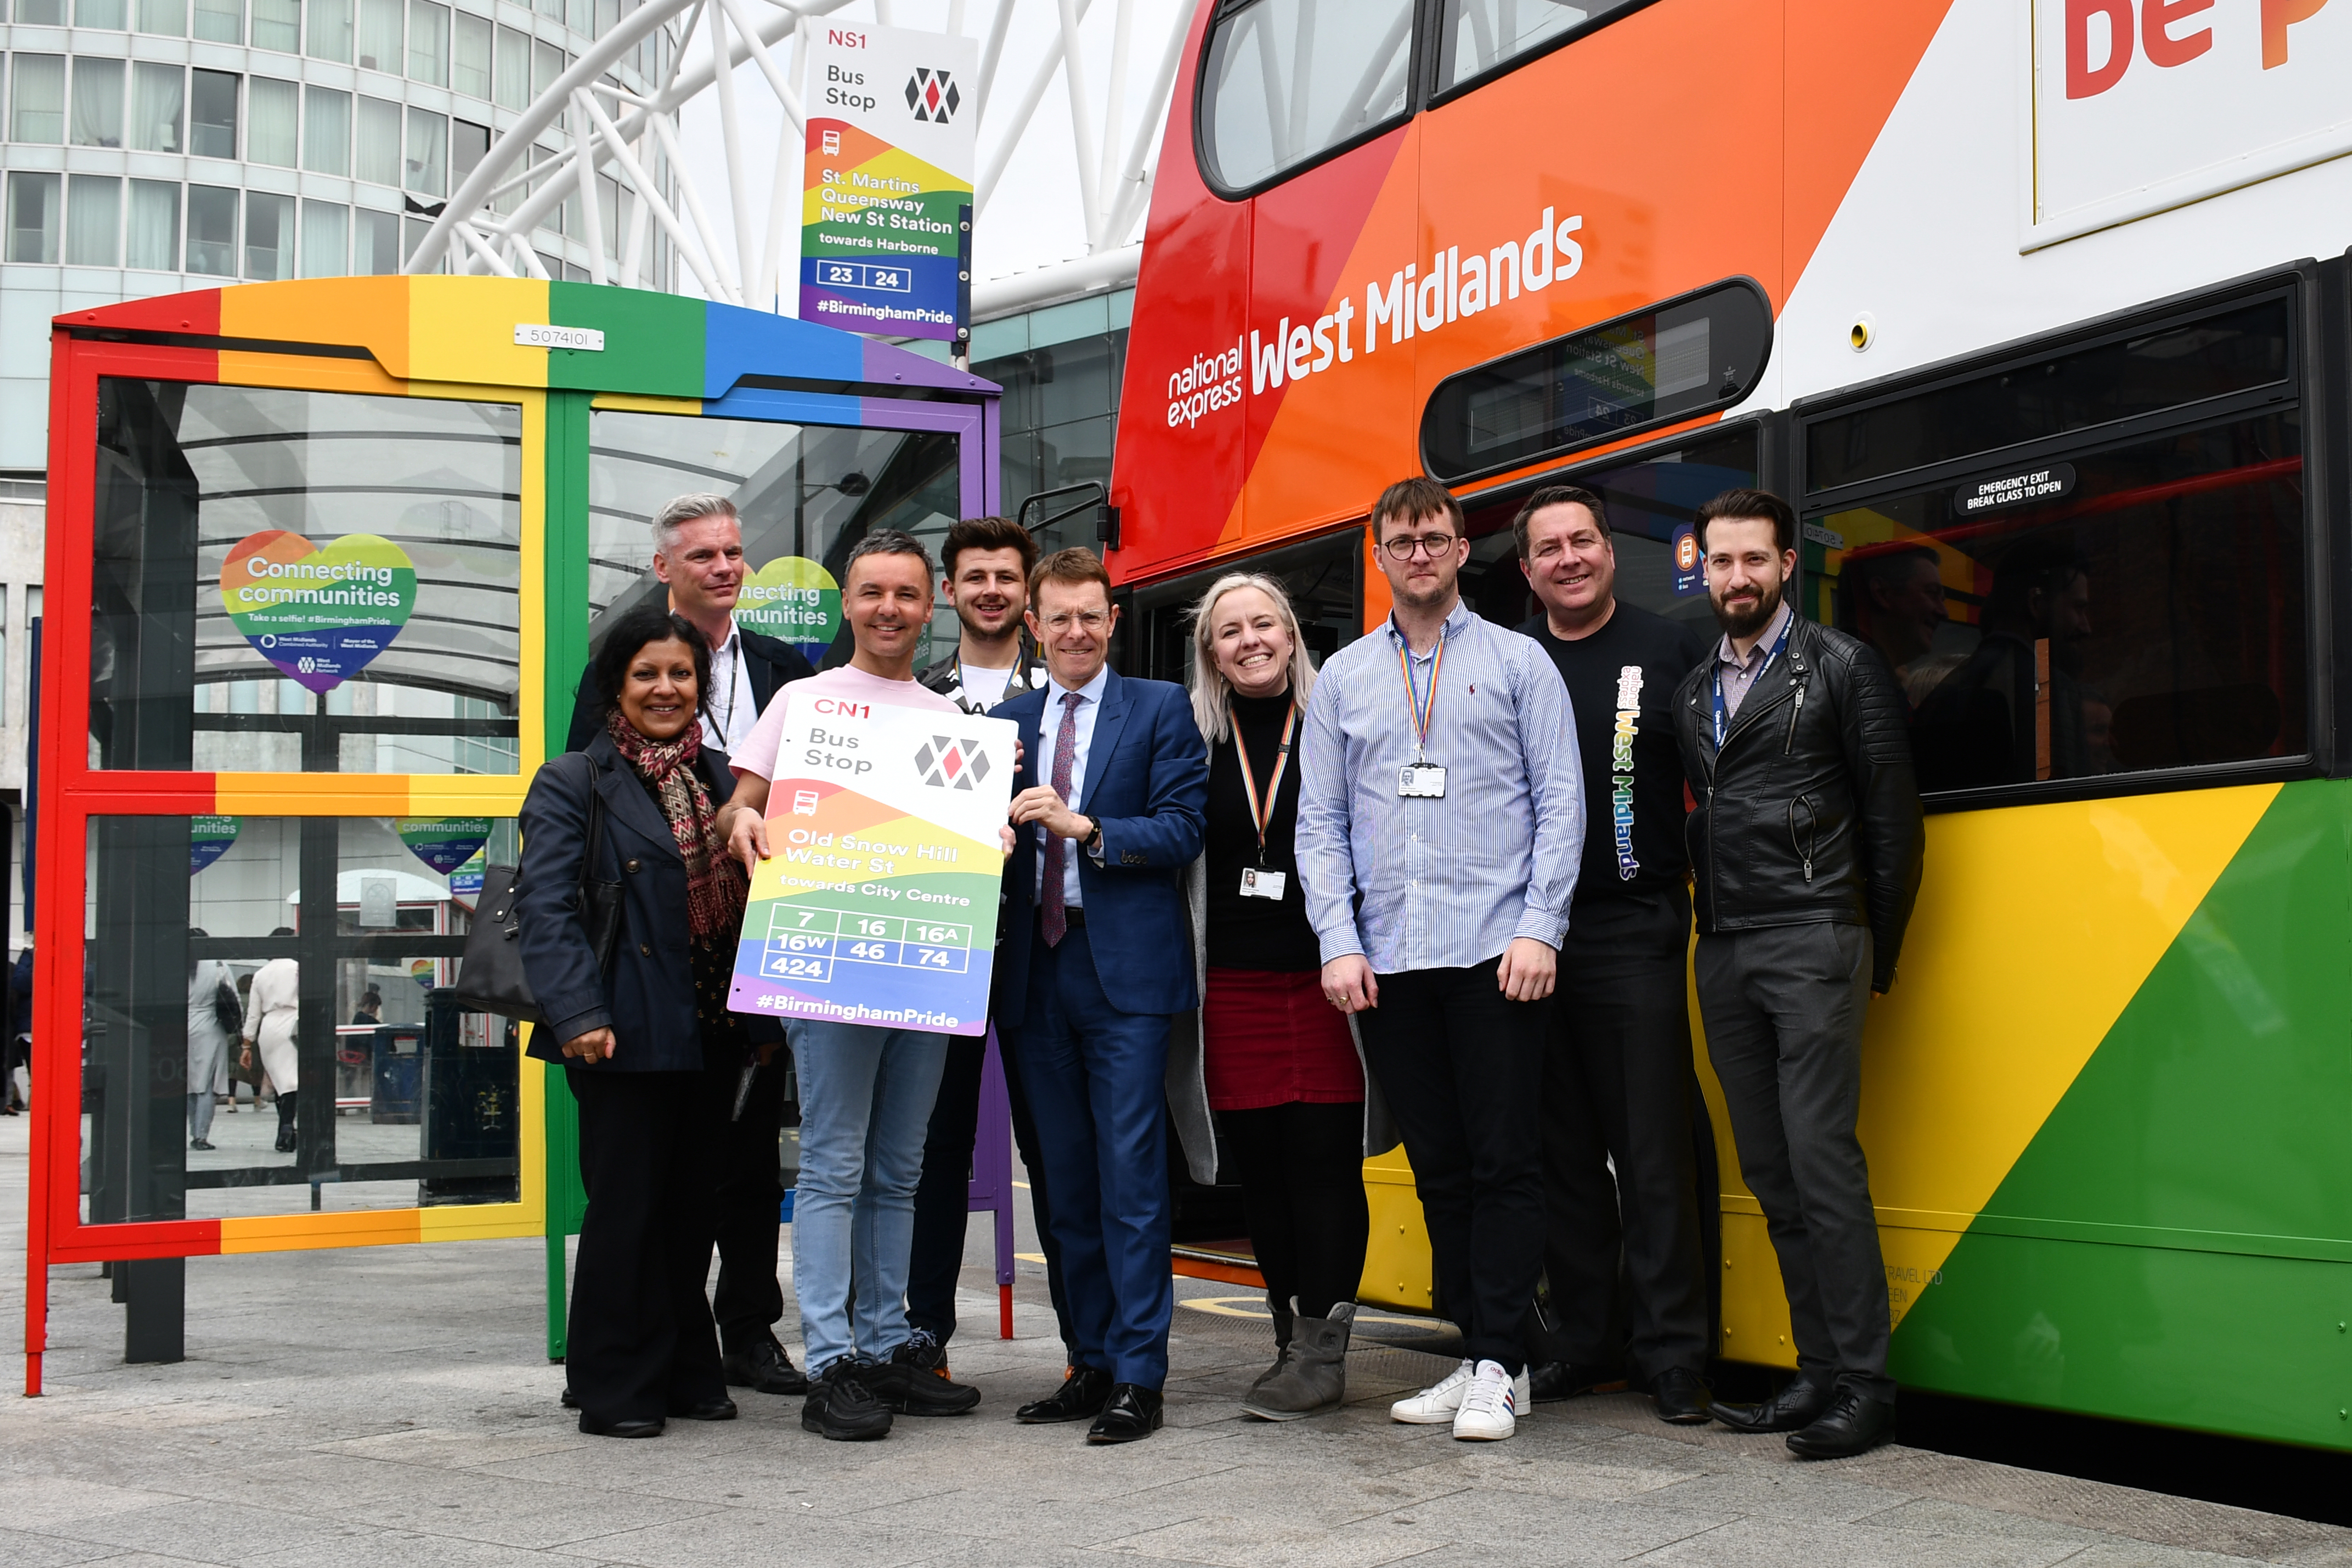 L-R Rinku Banerjee from the WMCA, Thomas Moore from Transport for West Midlands, Lawrence Barton from Birmingham Pride, Martin Price from the WMCA, Mayor of the West Midlands Andy Street, Adrienne Frances and James Wharton from Birmingham LGBT and James Donnan and Bashir Khan from National Express West Midlands